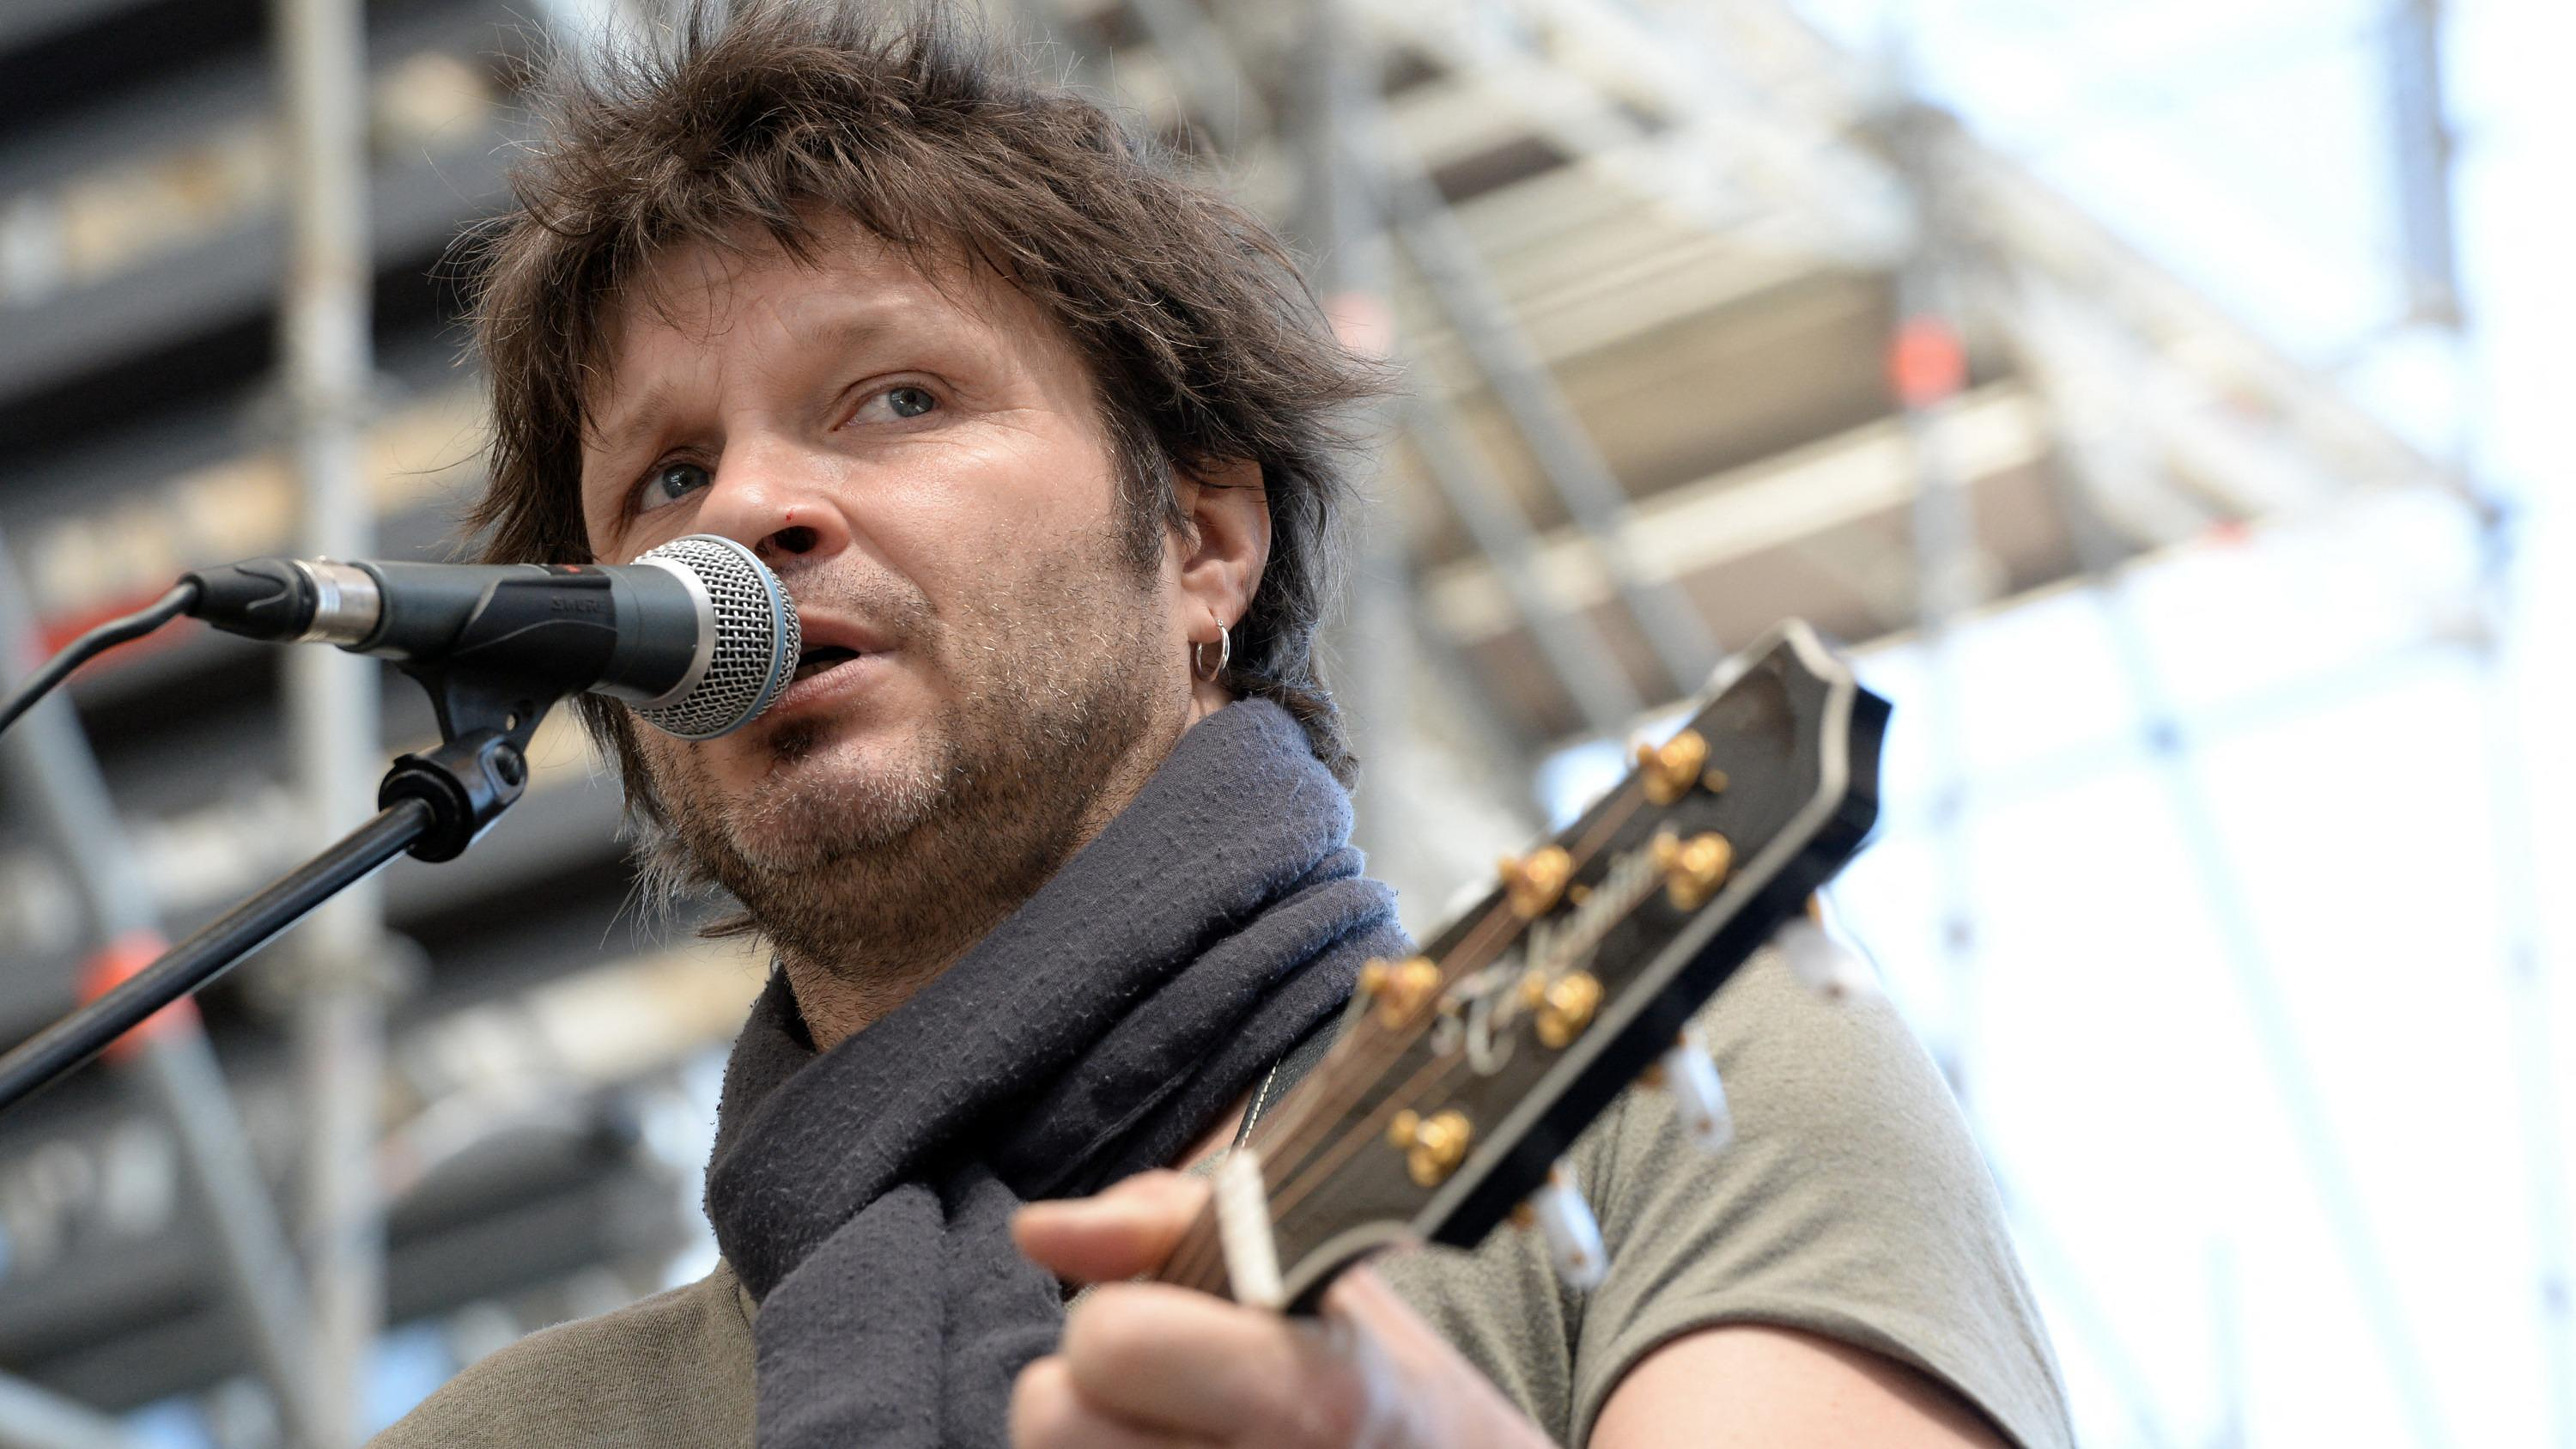 Bertrand Cantat finances his album on Ulule; the platform dissociates itself from the project